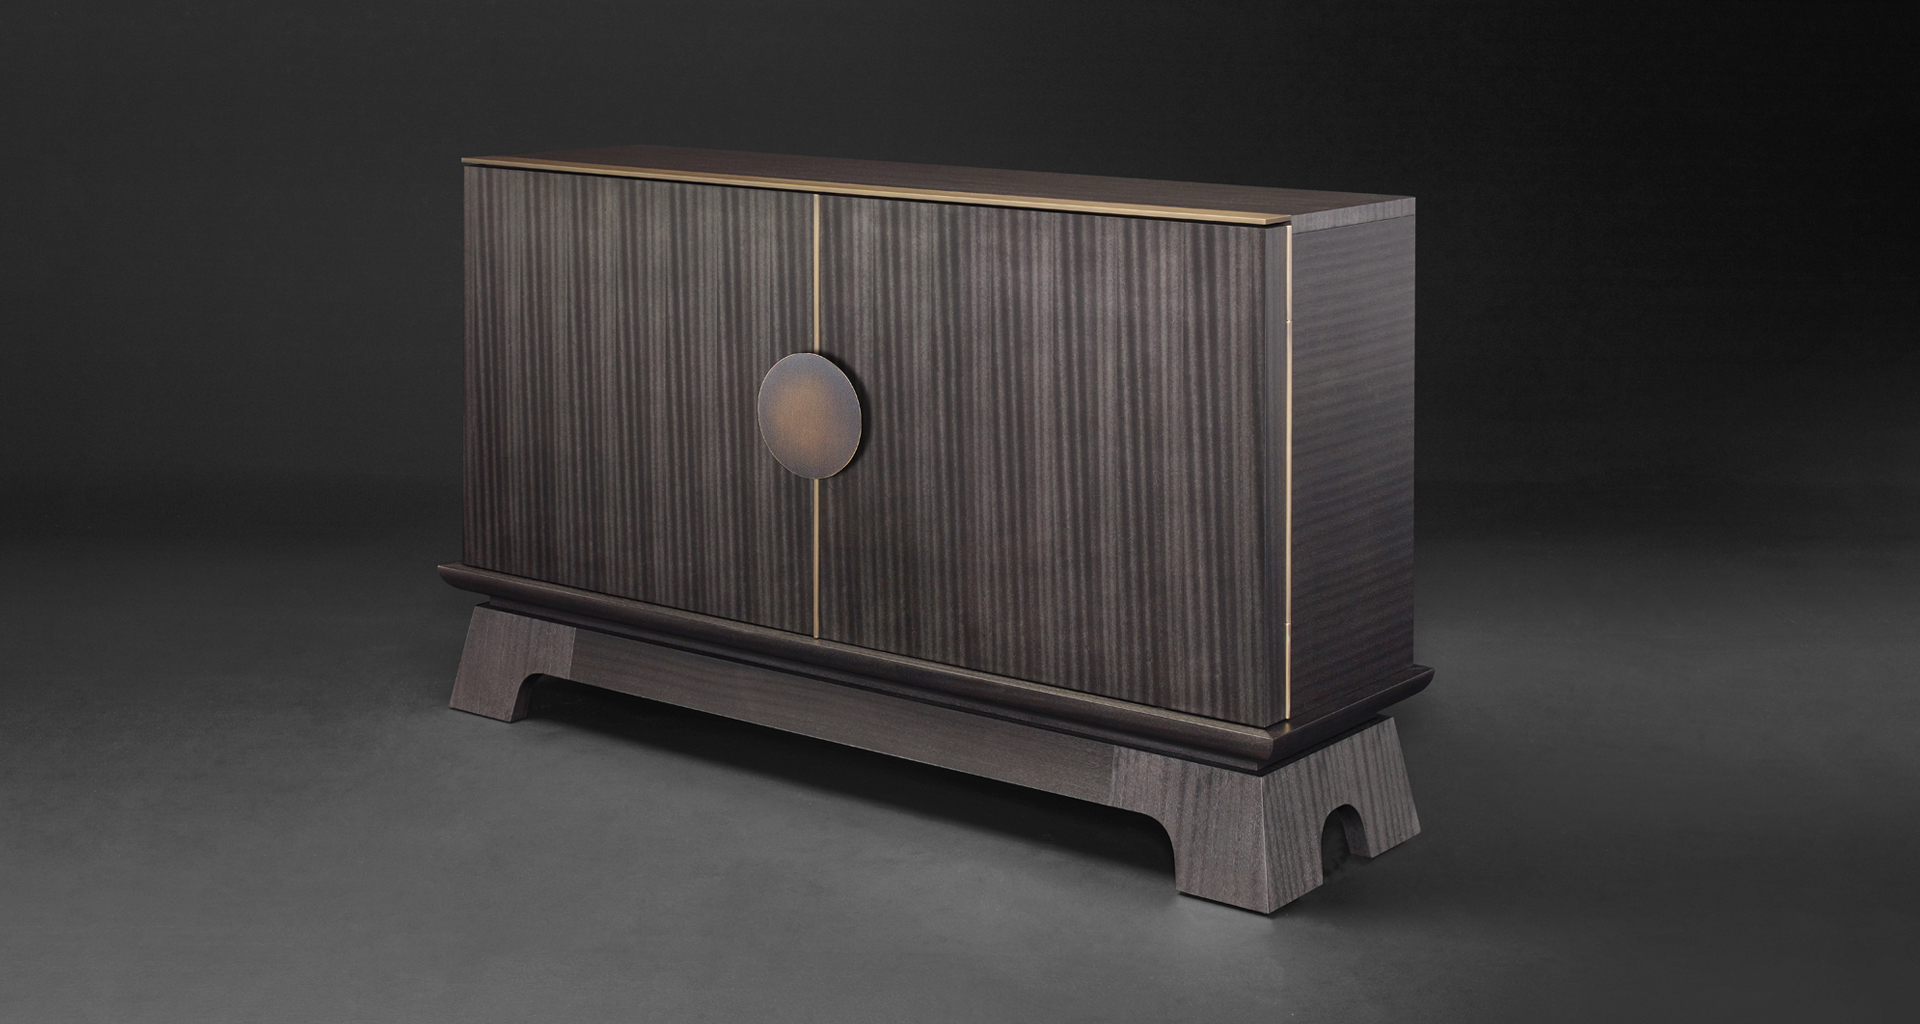 La Belle Aurore is a wooden cabnet with bronze details, from Promemoria's catalogue | Promemoria